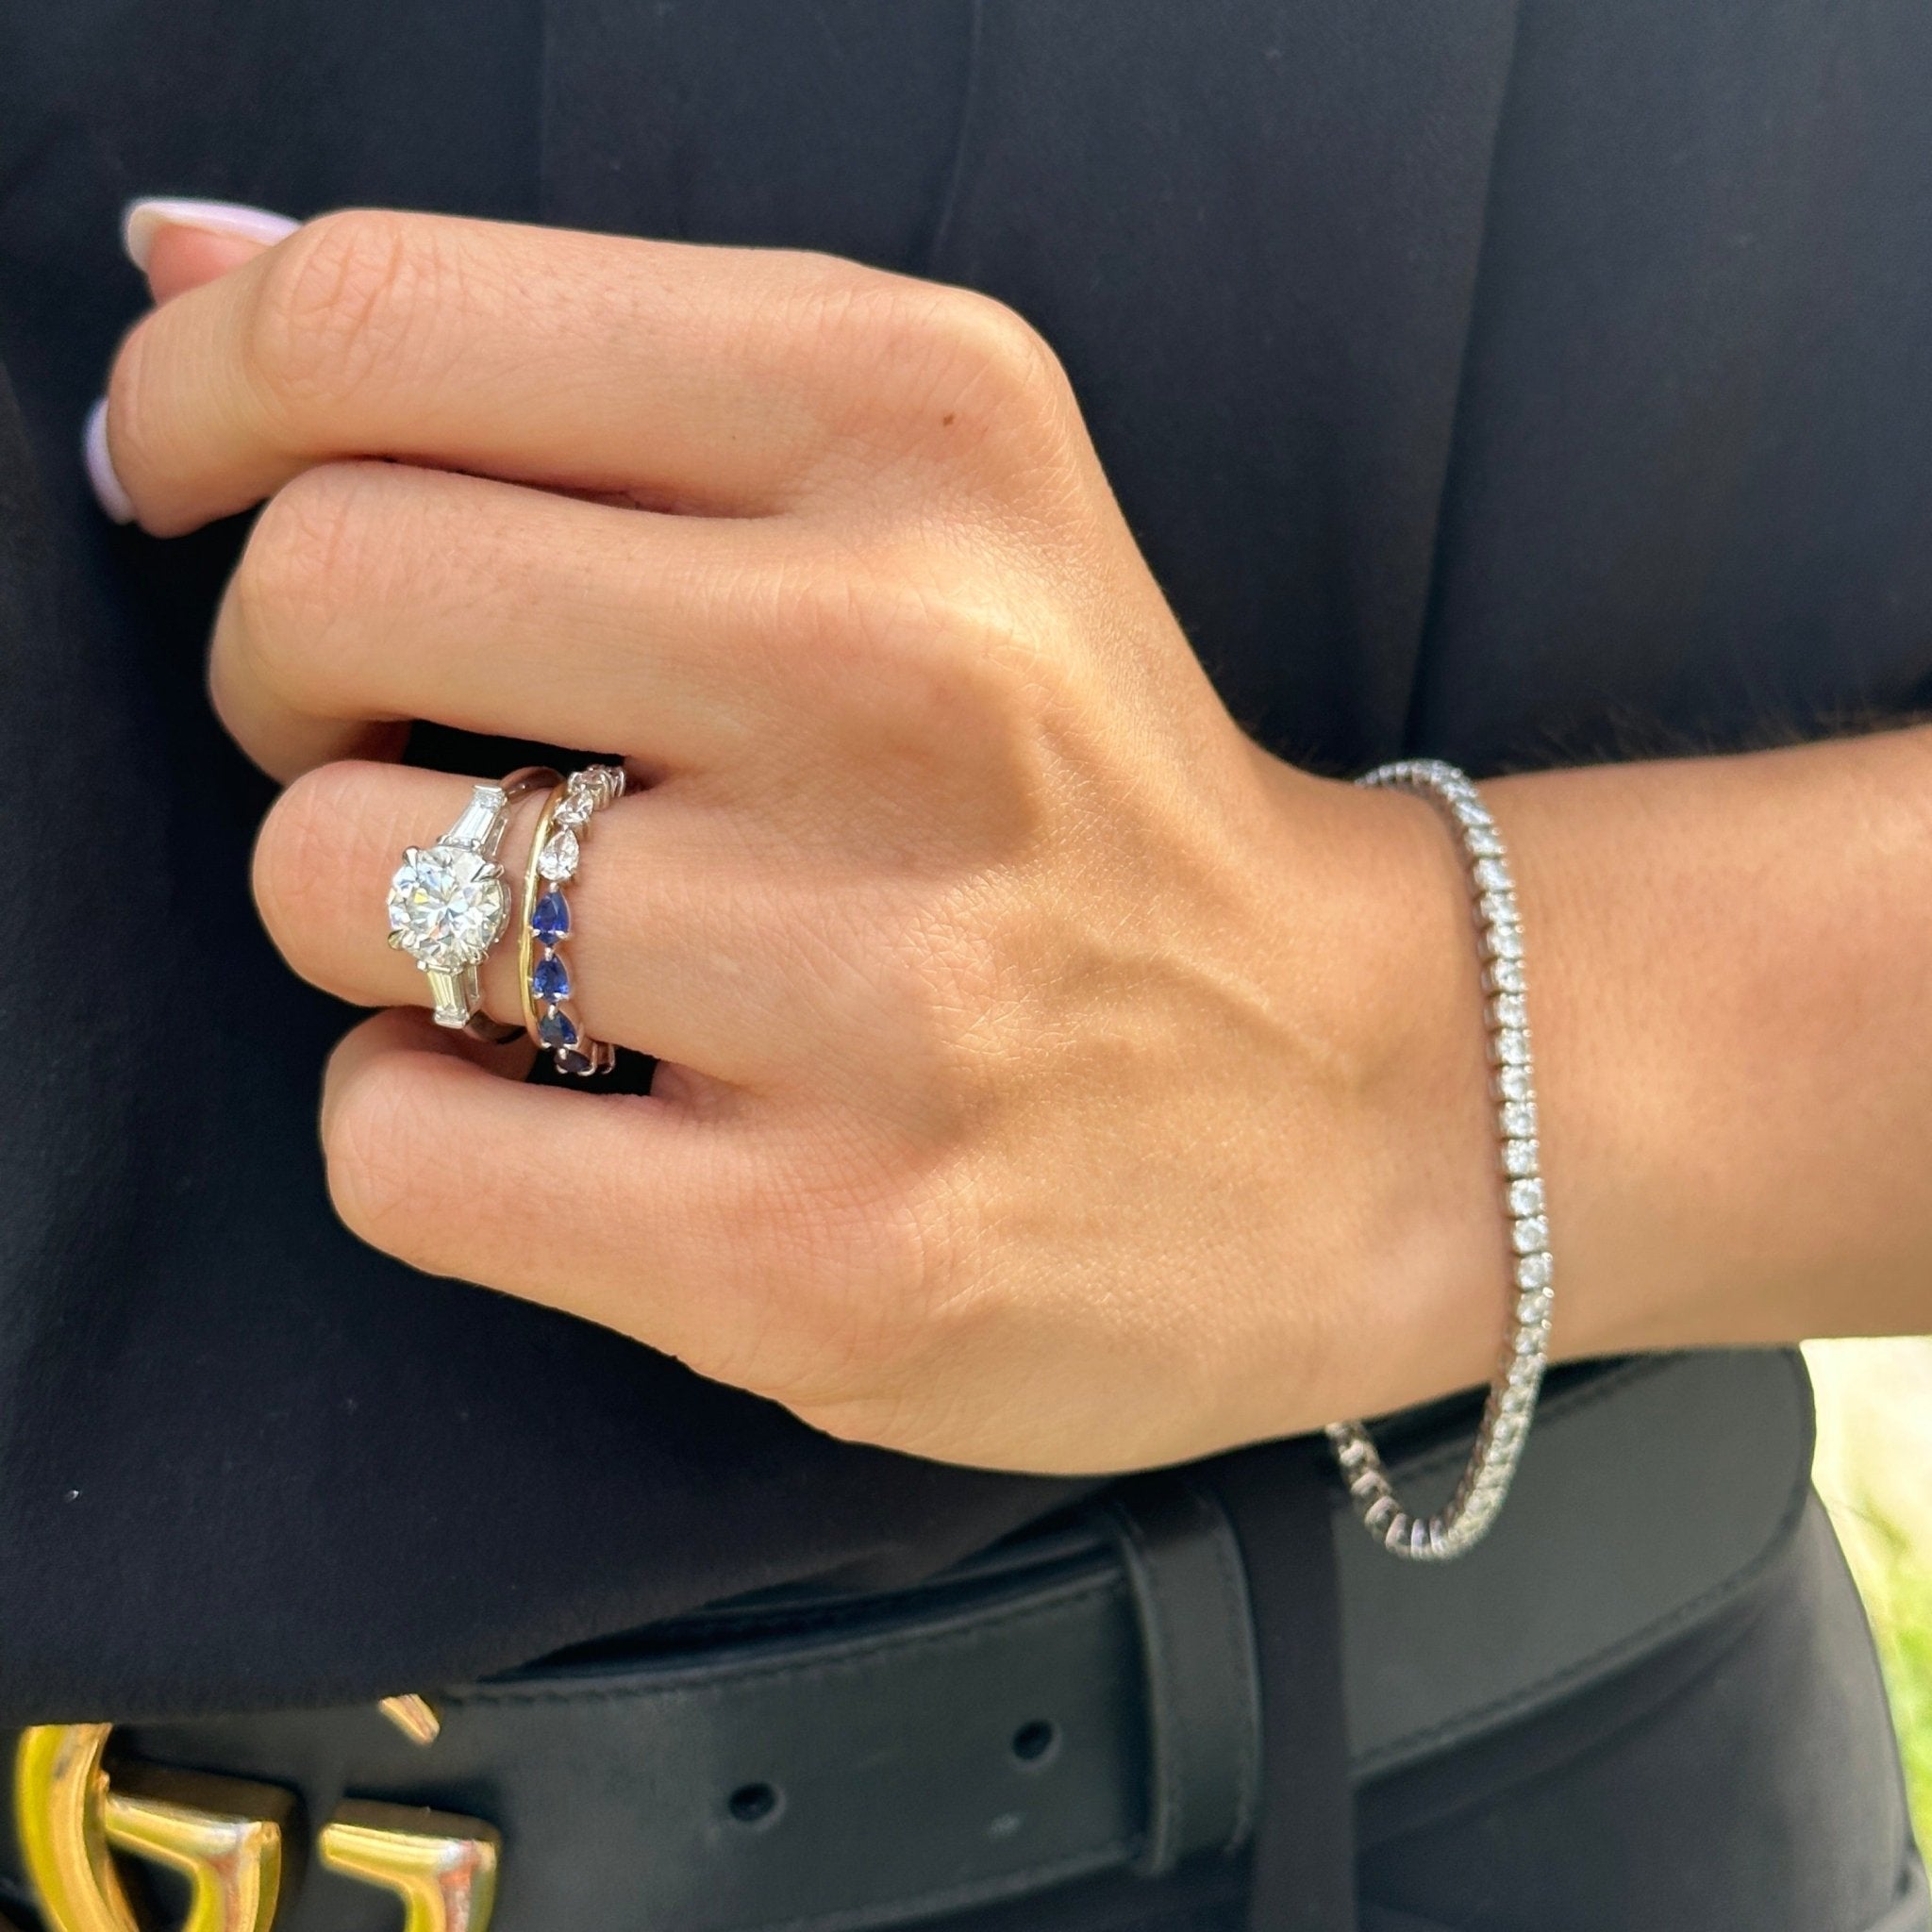 Engagement Ring Finger – Left or Right? | Jewelry Guide